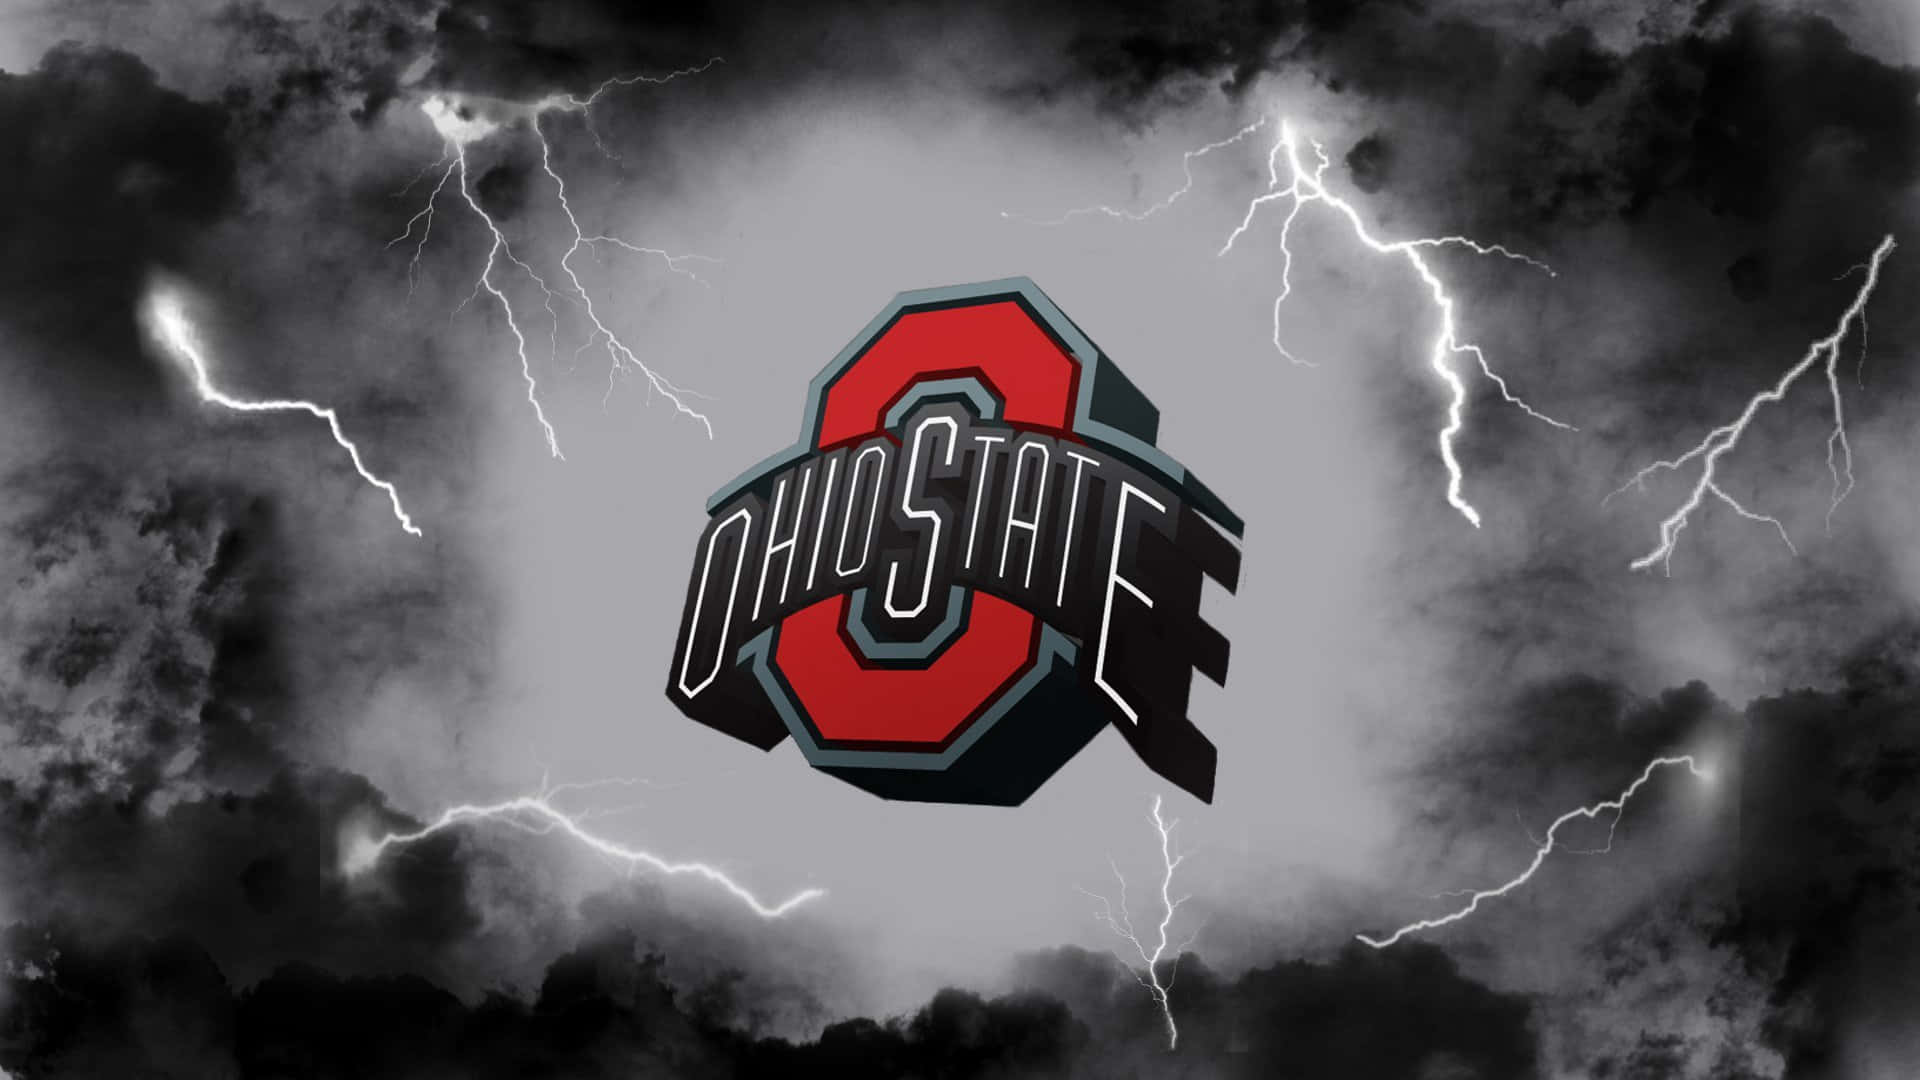 Ohio State Logo Storm Cloud With Lightning Strikes Wallpaper